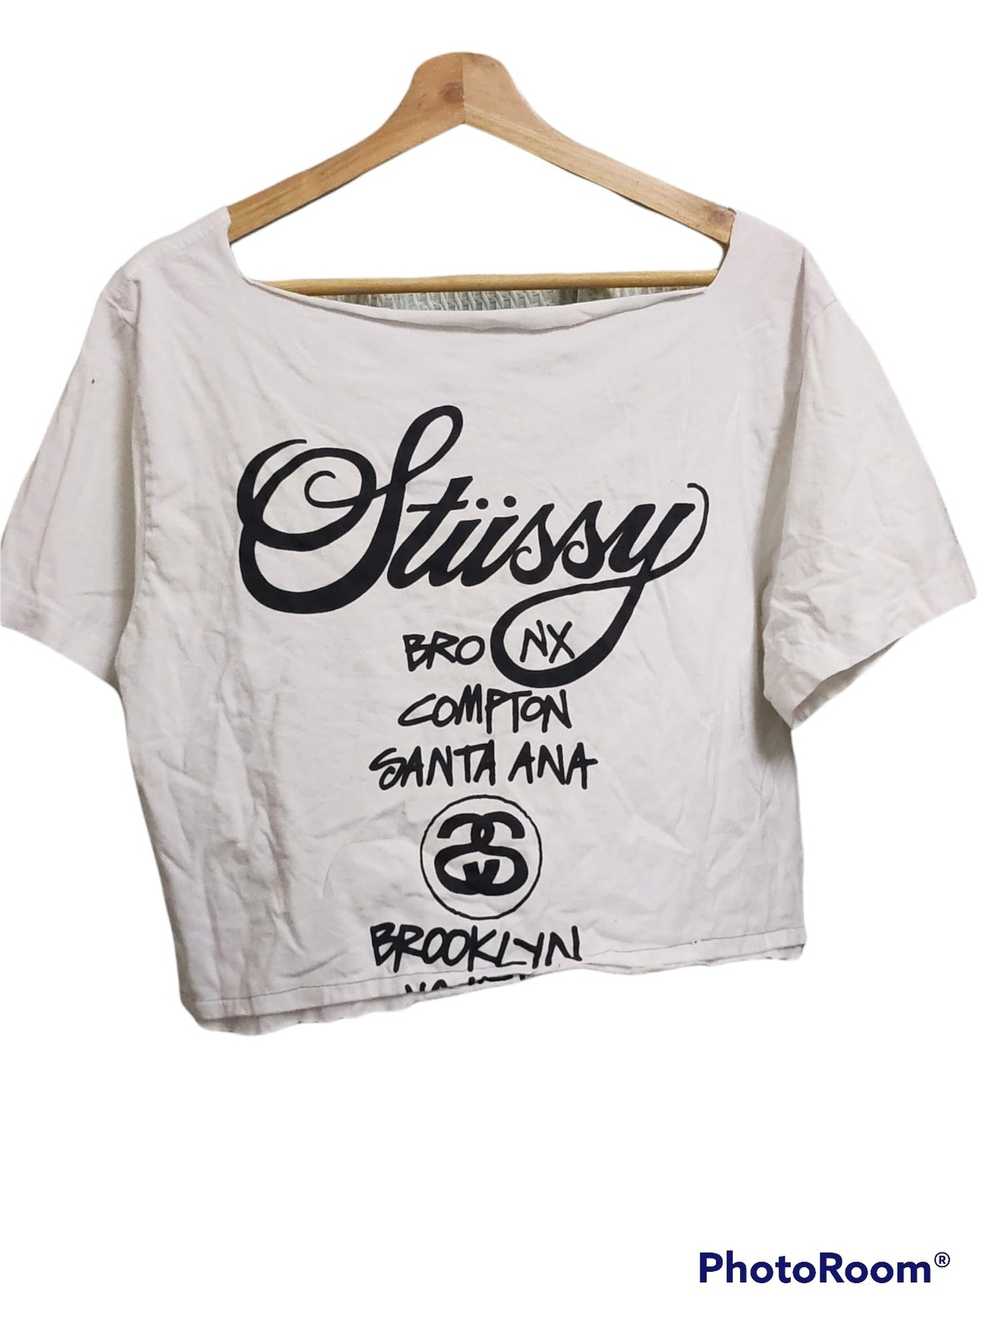 Stussy STUSSY custom made tank tops special - image 2